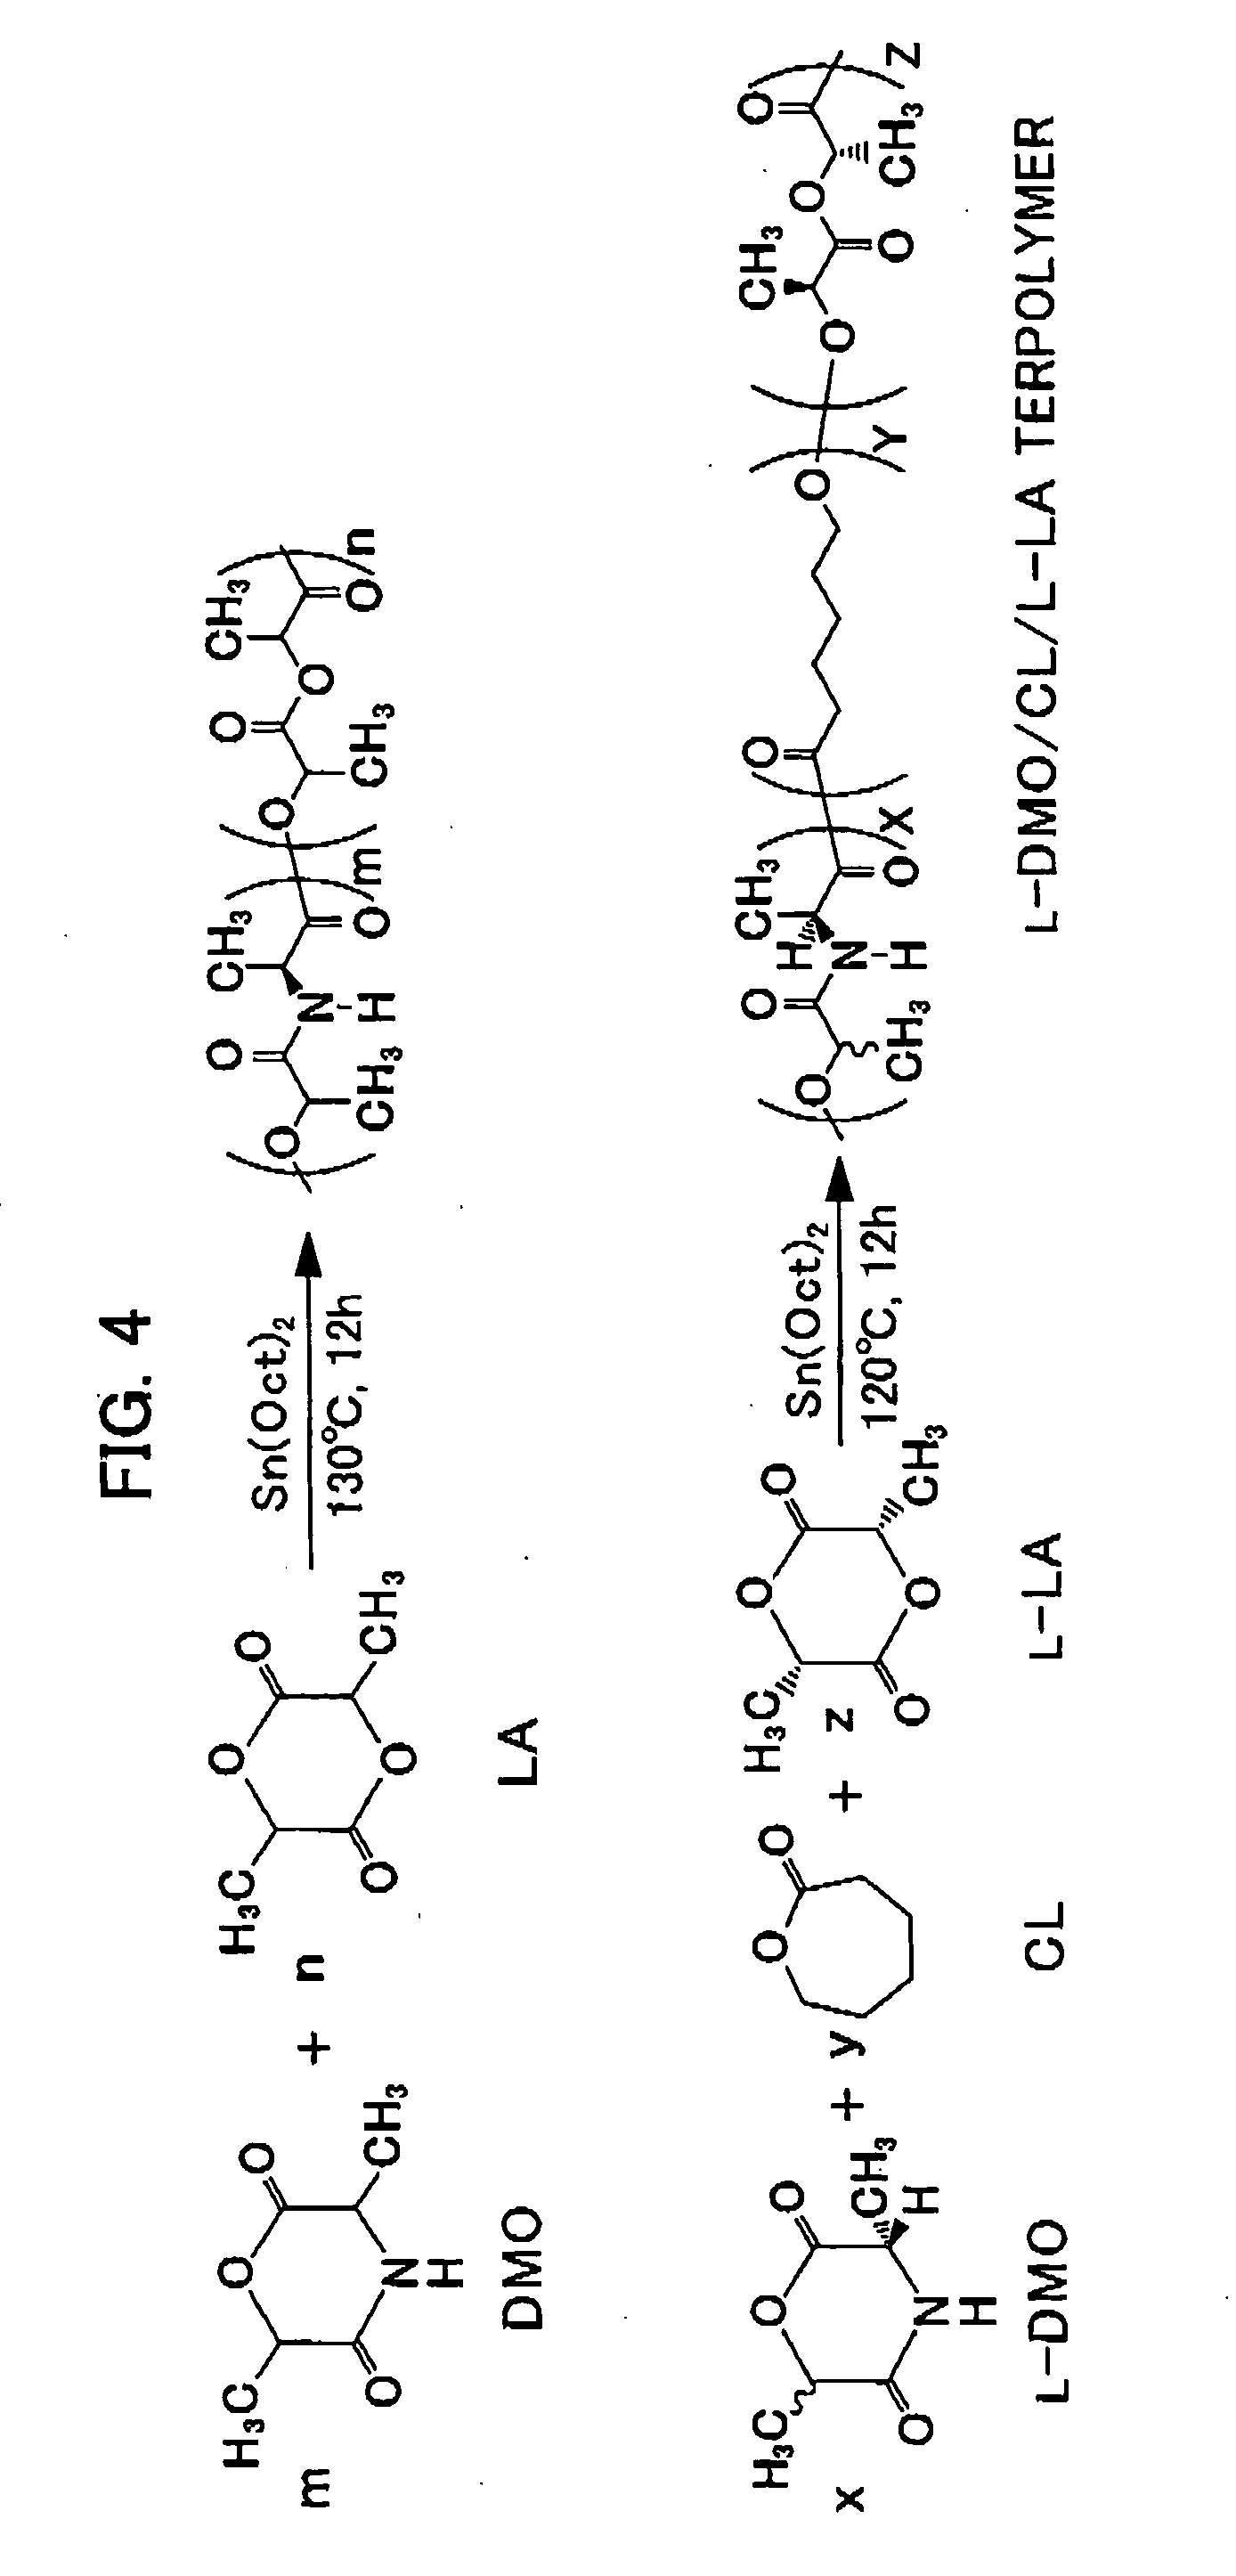 Biodegradable bio-absorbable material for clinical practice